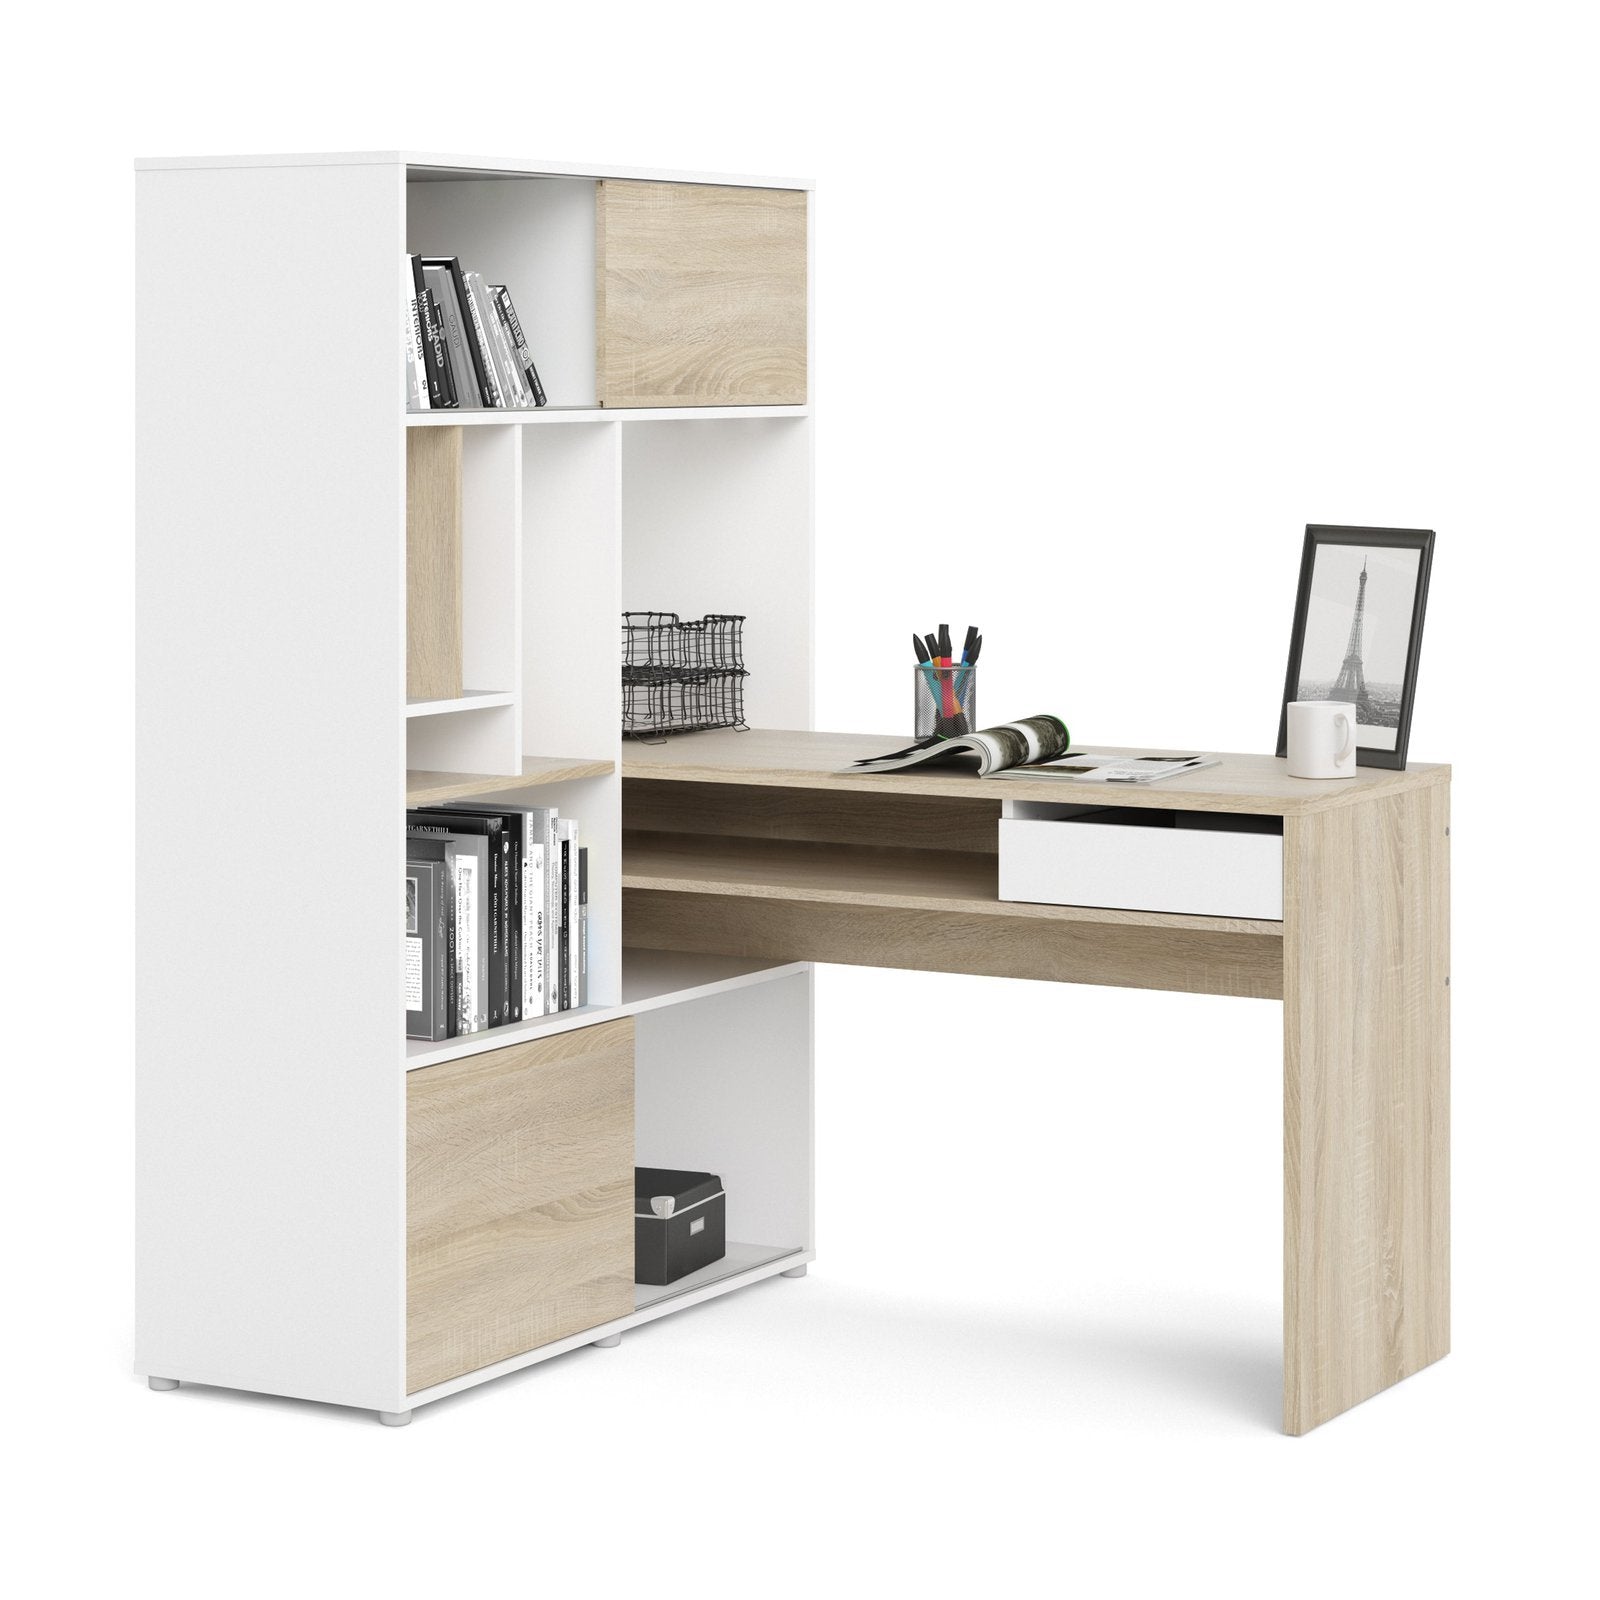 Function Plus Desk with multi-functional storage unit In White and Oak